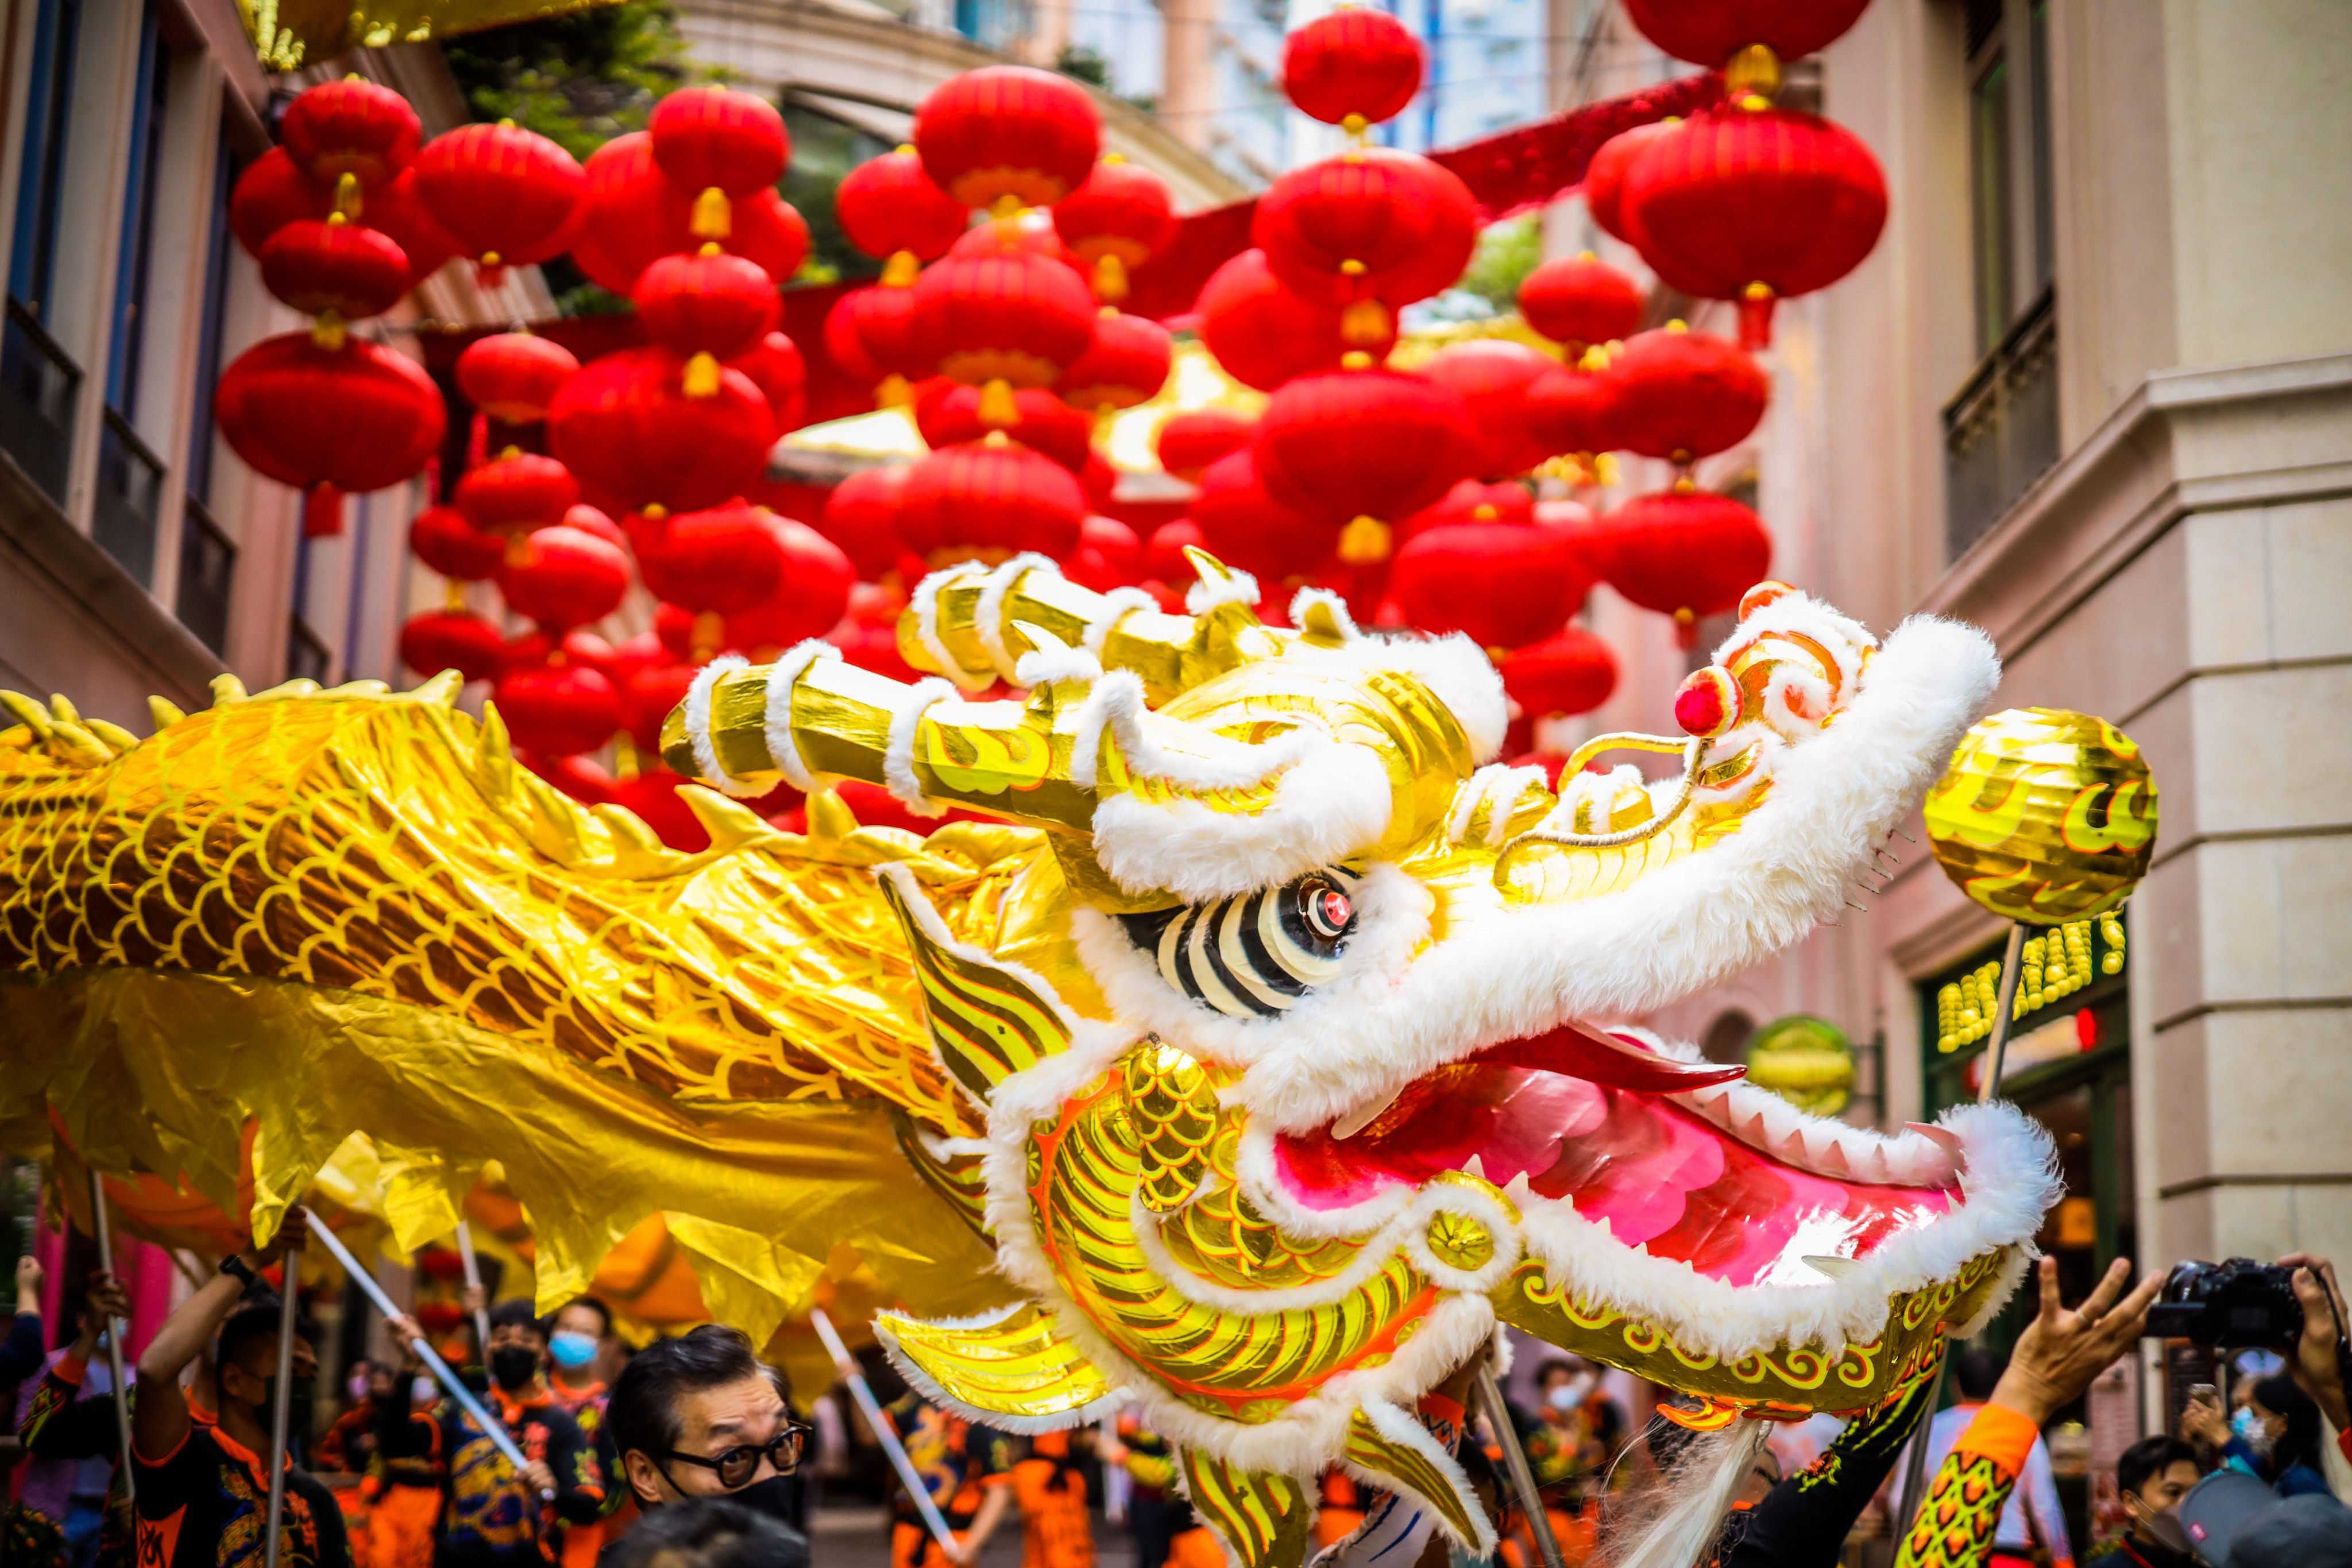 The Dragon & Lion Dance Spectacular at Lee Tung Avenue on February 20 is one of many fun things to do in Hong Kong during Lunar New Year to usher in the Year of the Dragon. Photo: Lee Tung Avenue